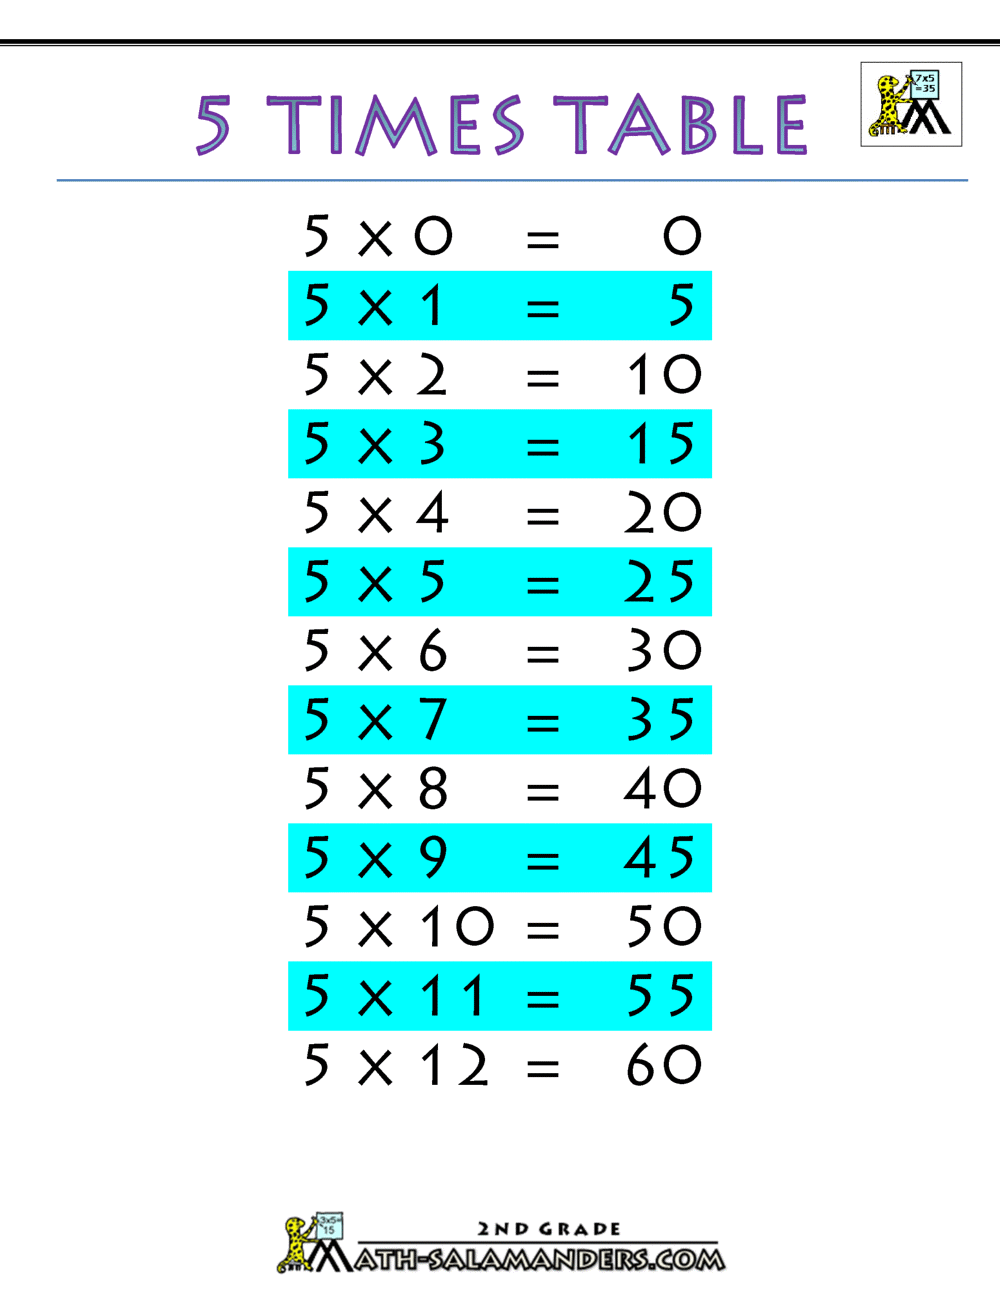 5 times table multiplication worksheets